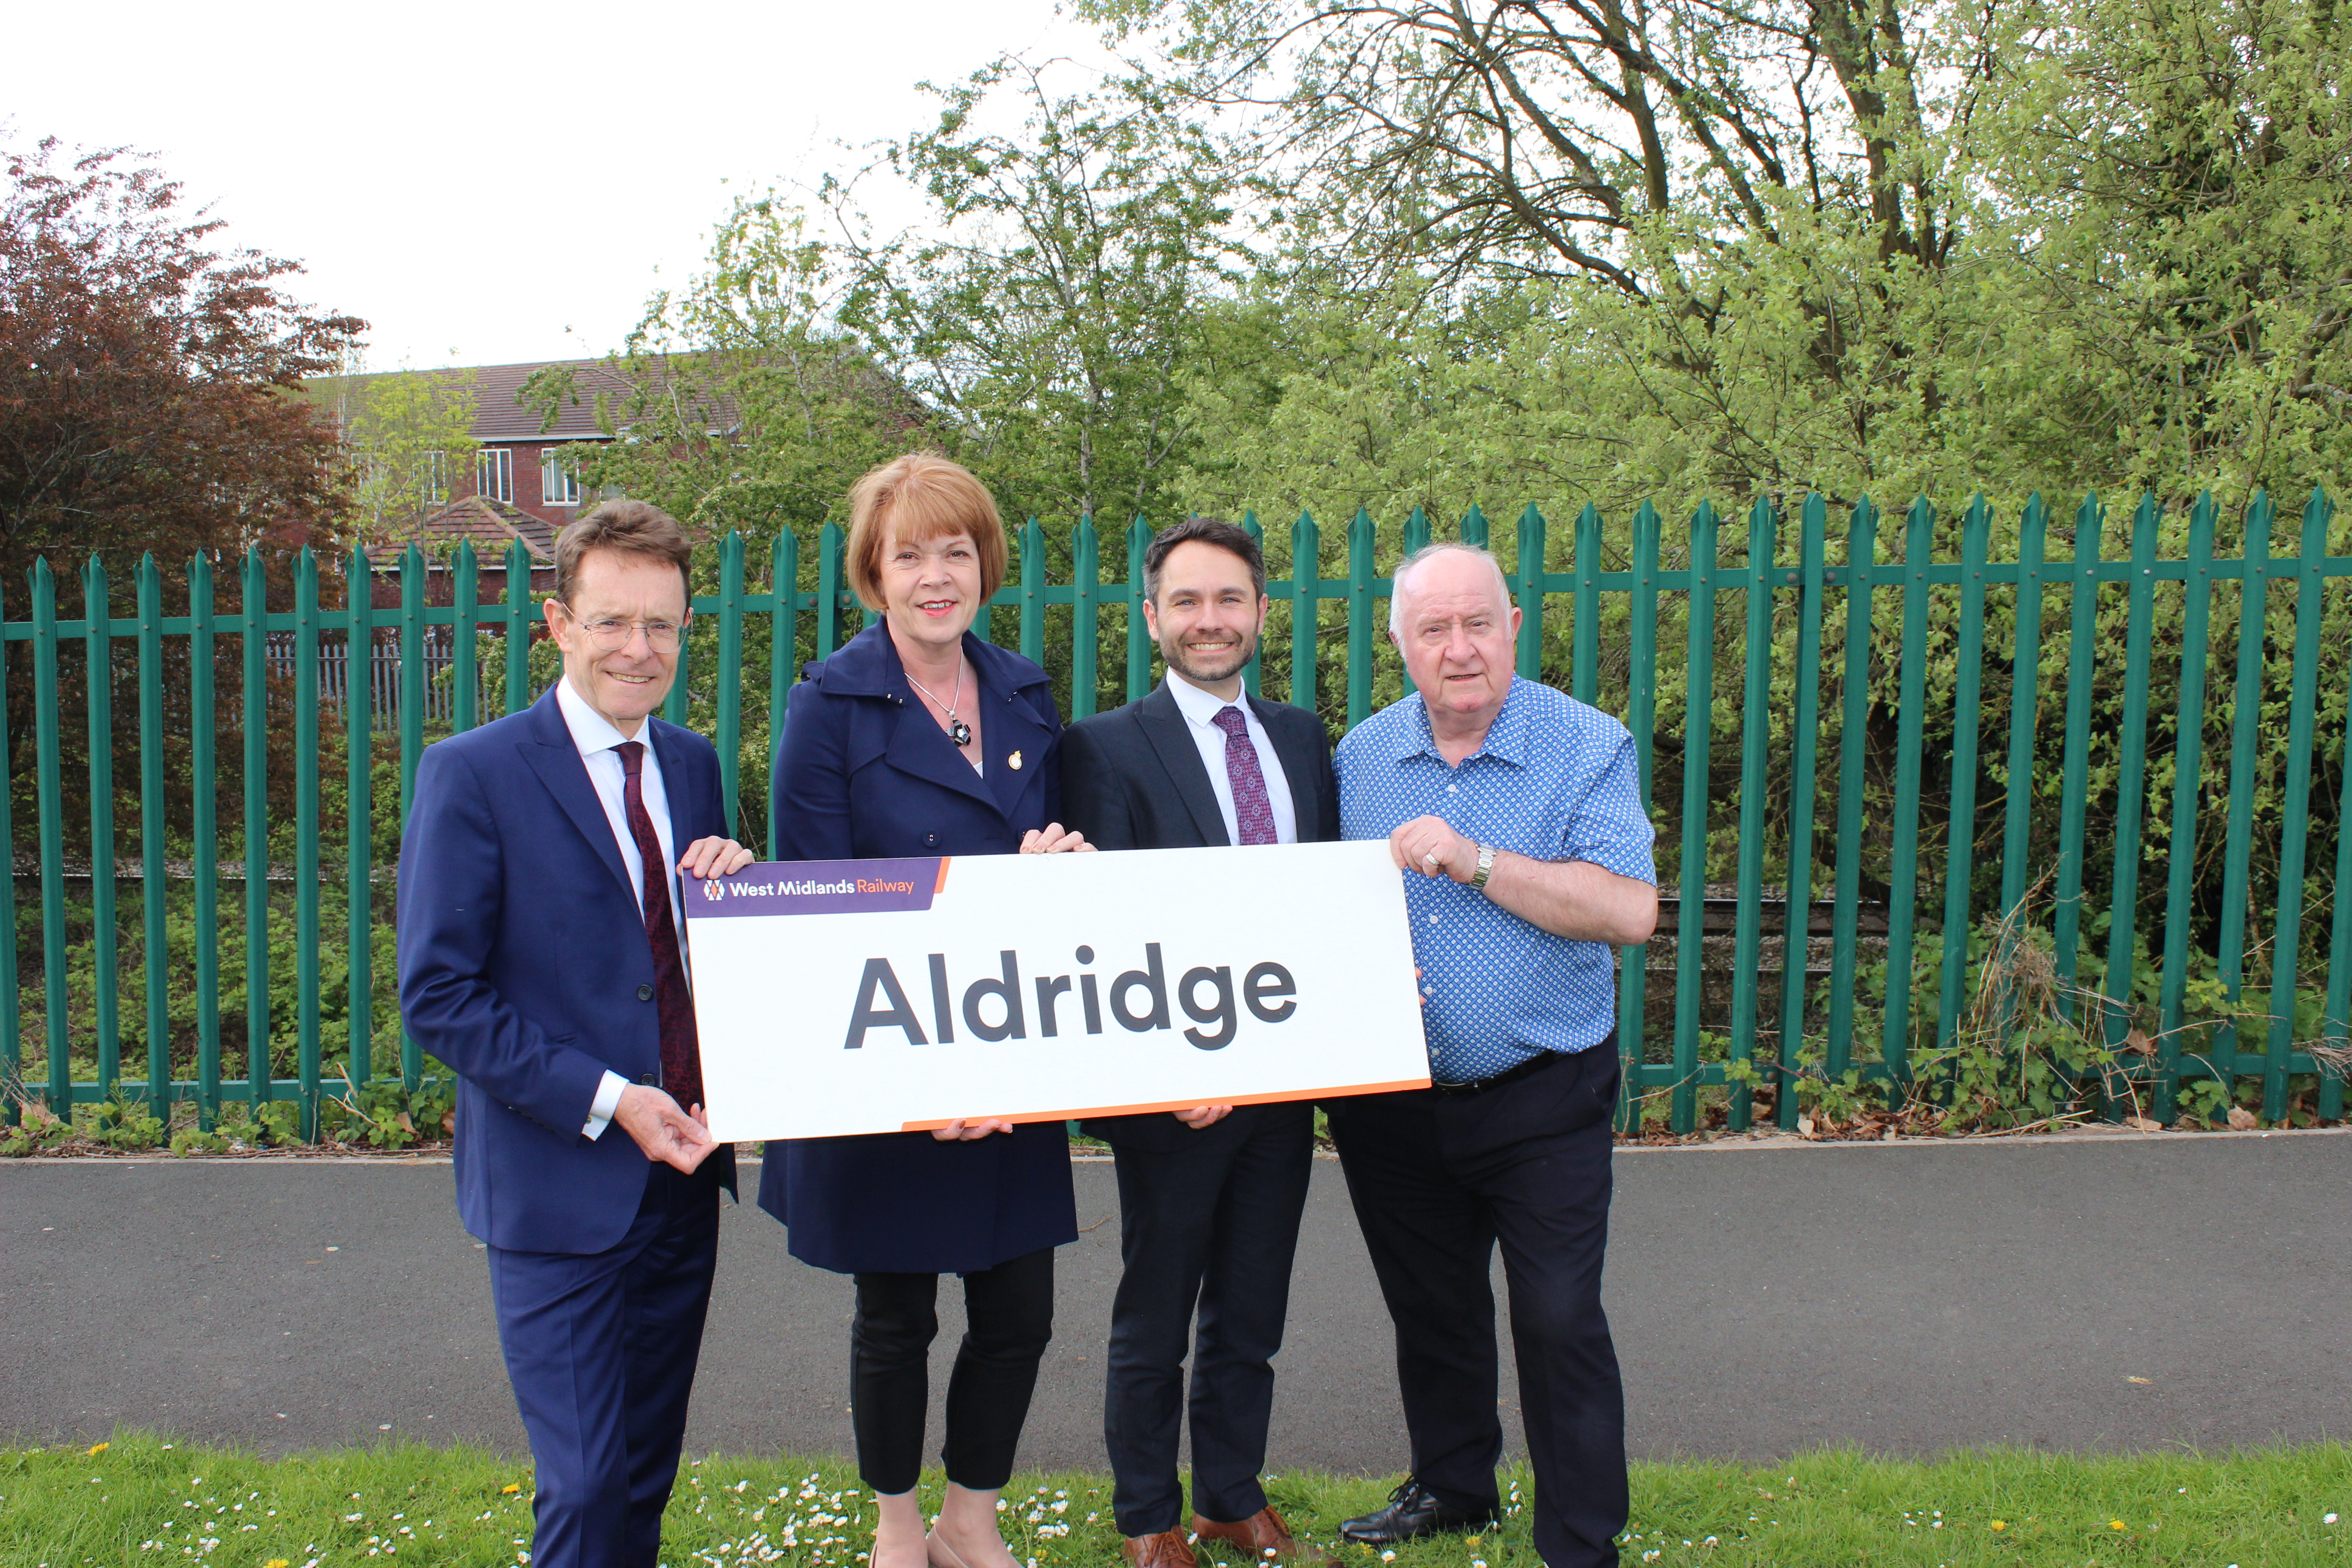 West Midlands Mayor Andy Street, Aldridge and Brownhills MP Wendy Morton, director of rail for TfWM Tom Painter and Walsall Council leader Cllr Mike Bird at the proposed Aldridge Station site